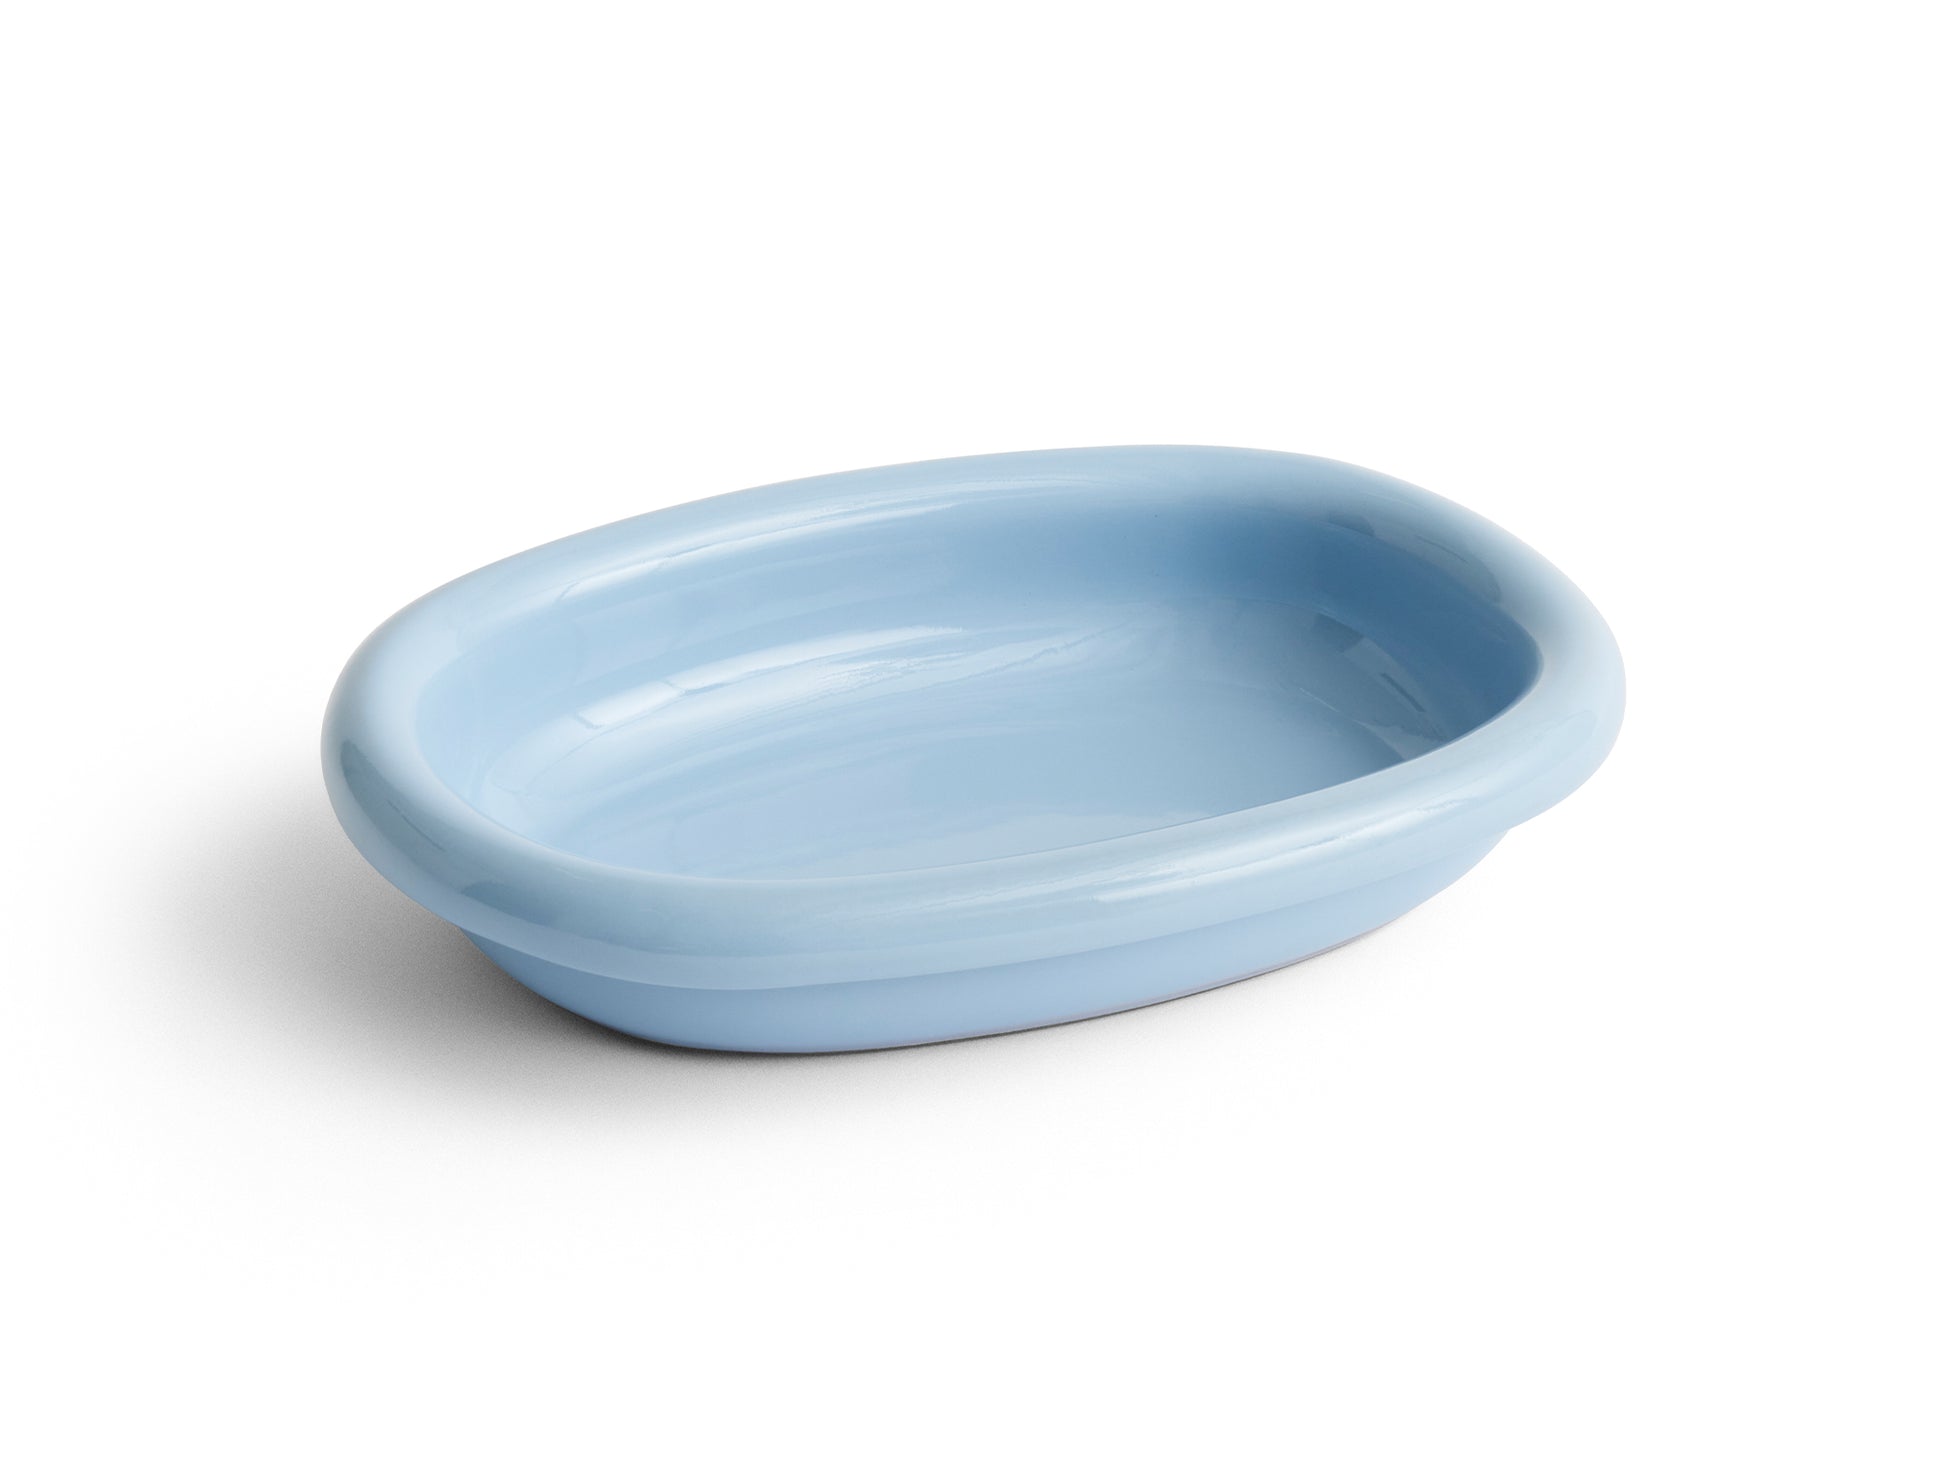 Barro Oval Dish by HAY - Small / Light Blue